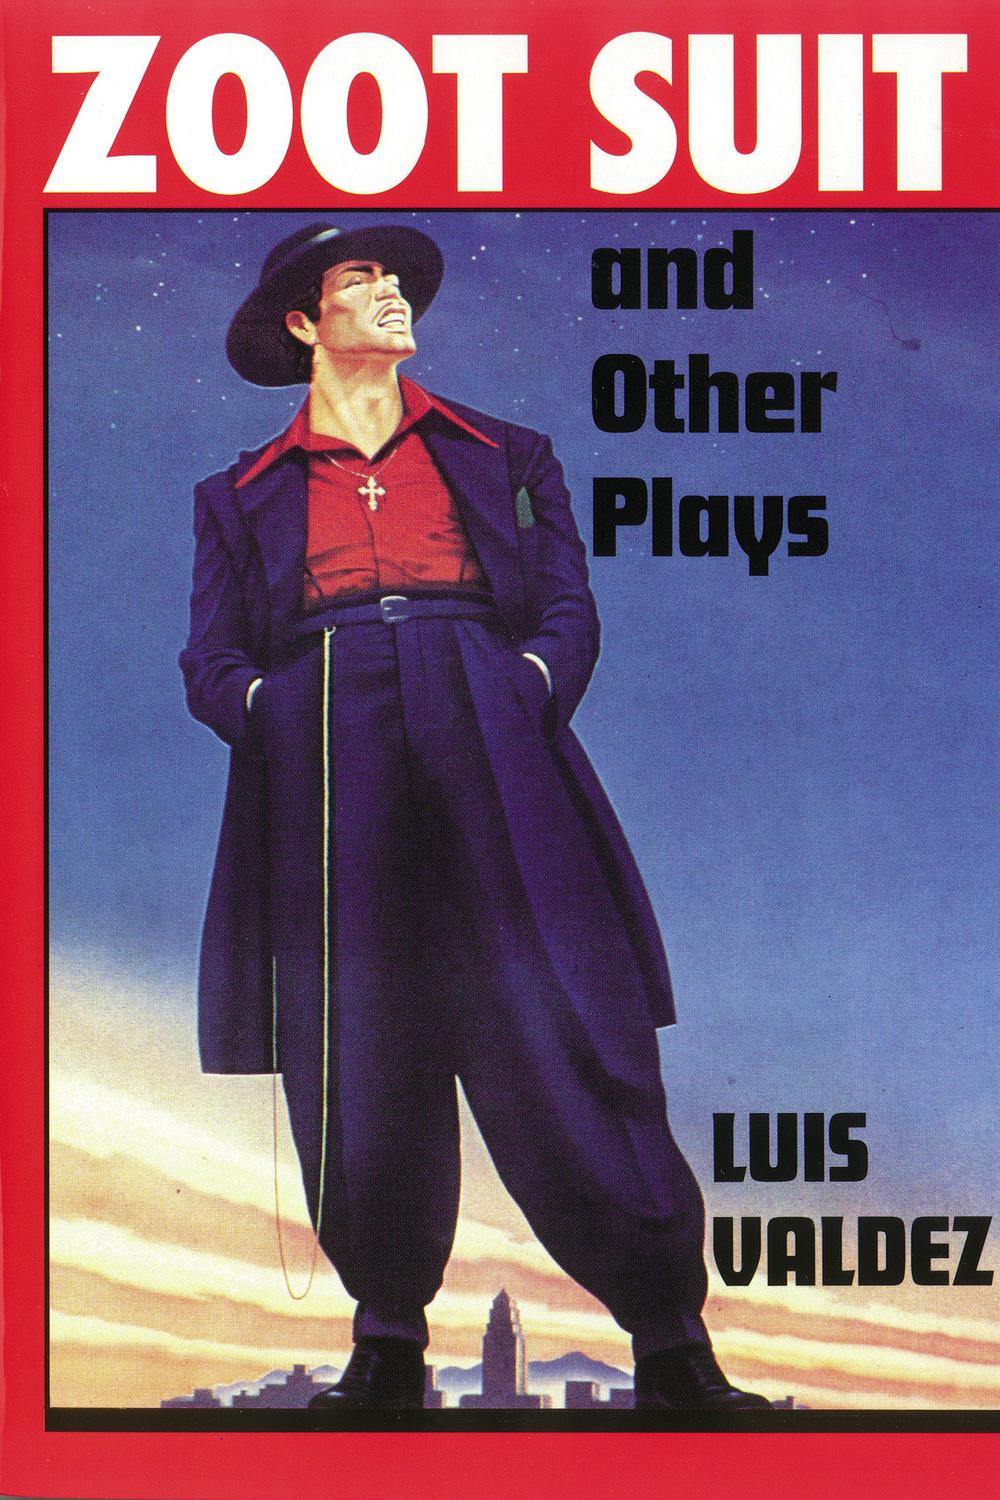 Zoot Suit and Other Plays - Valdez, Luis